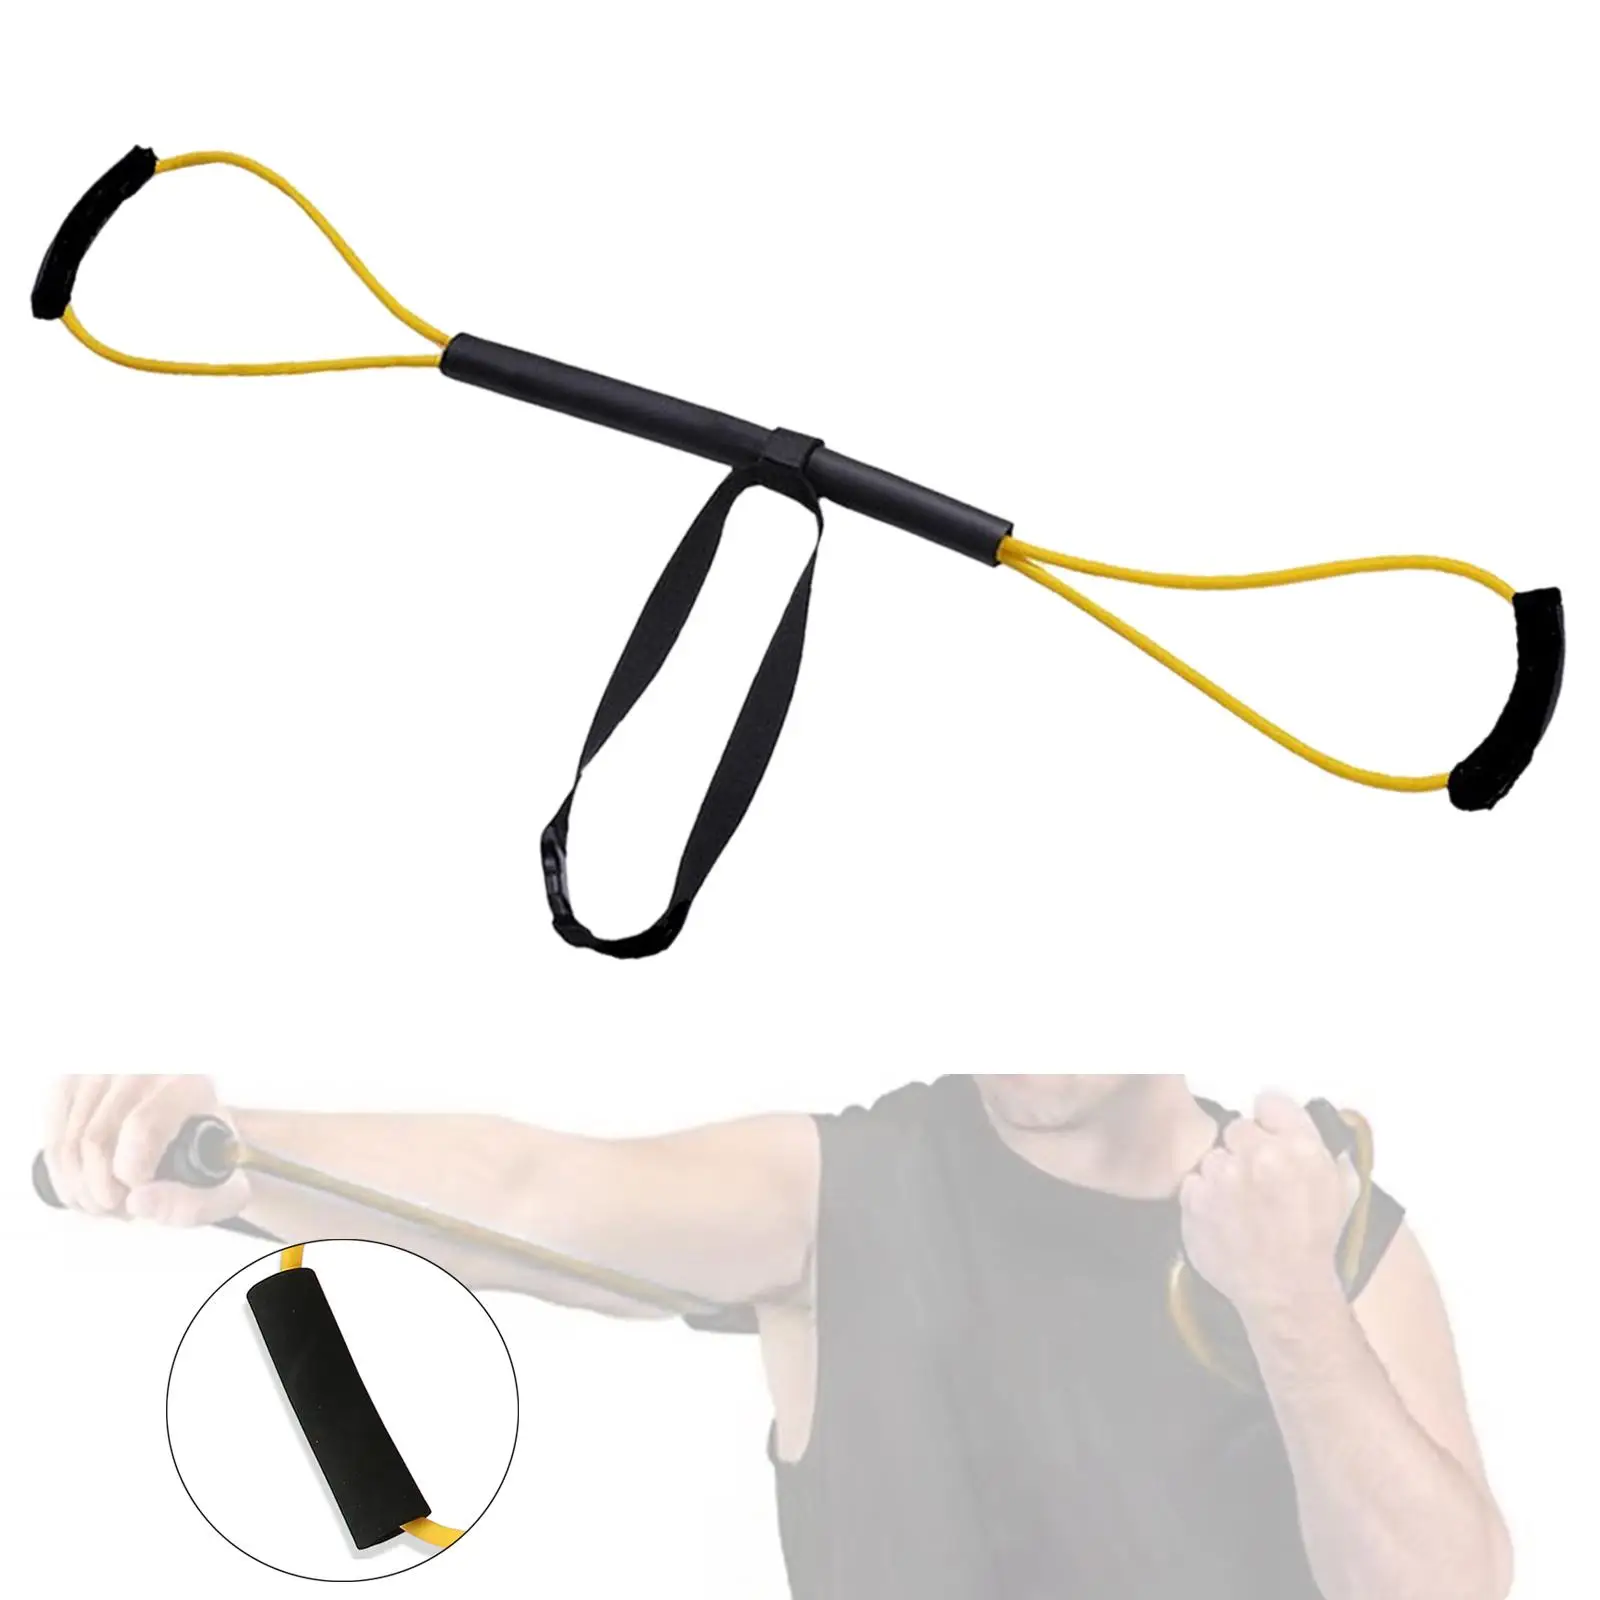 Boxing Resistance Bands Exercise Bands for Home Gym Exercise Bands Elastic Bands Punching Equipment for Karate Shadow Boxing